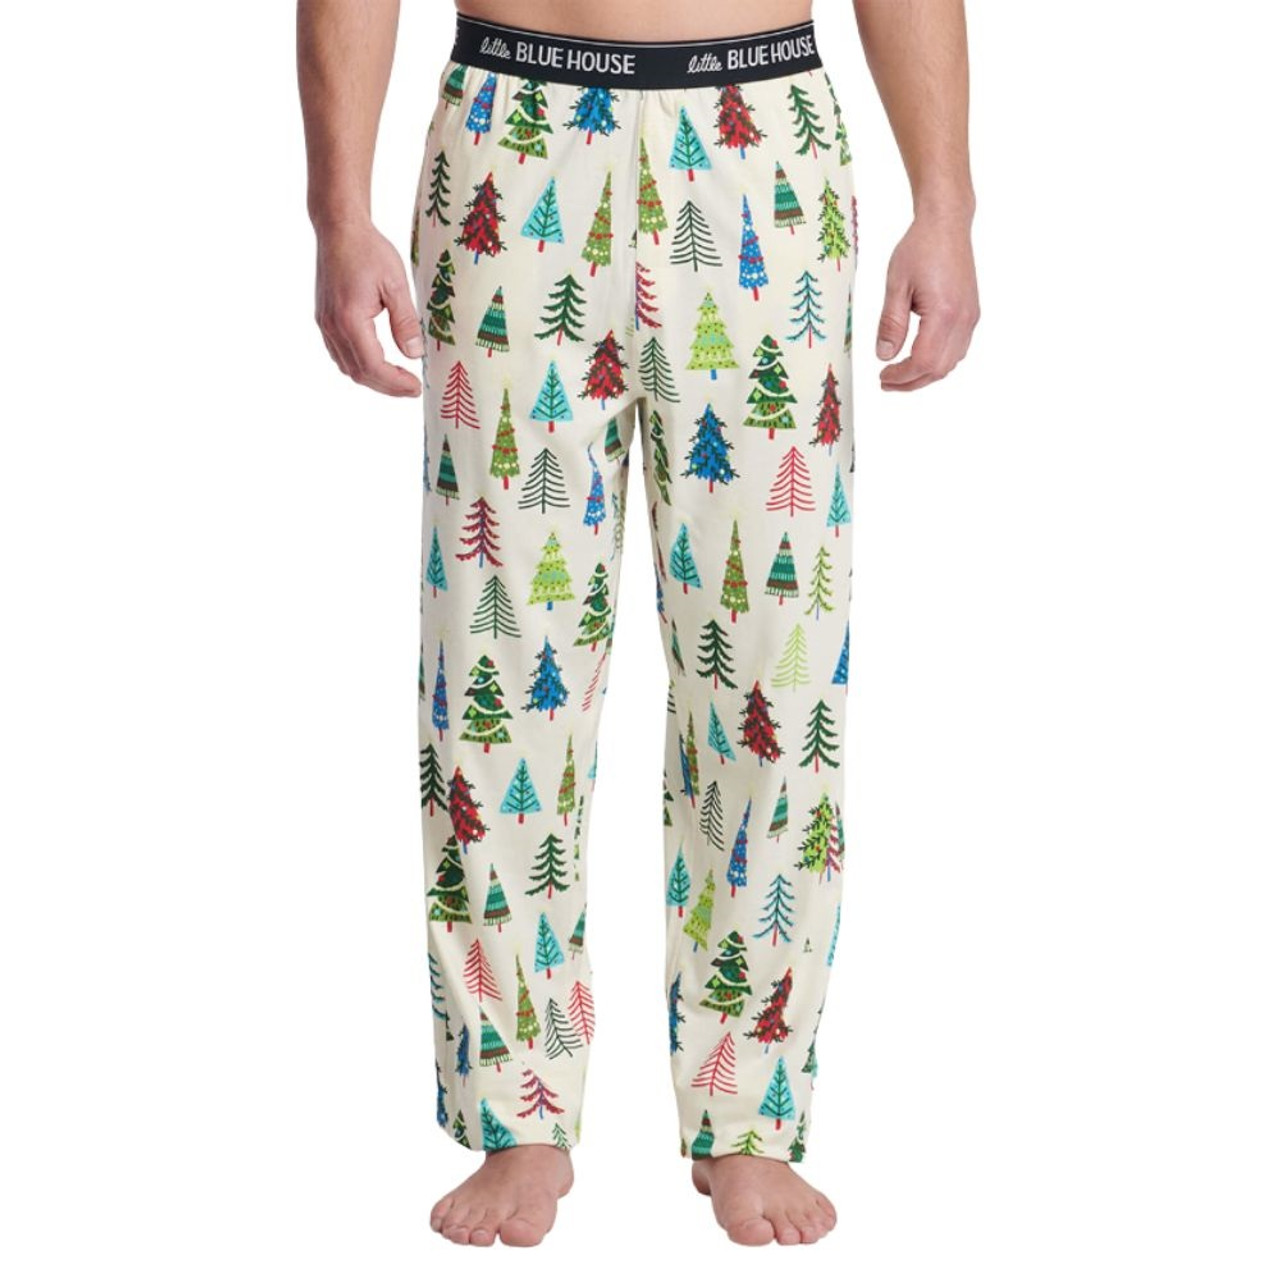 Men's Country Christmas Plaid Flannel Pajama Pants by Hatley